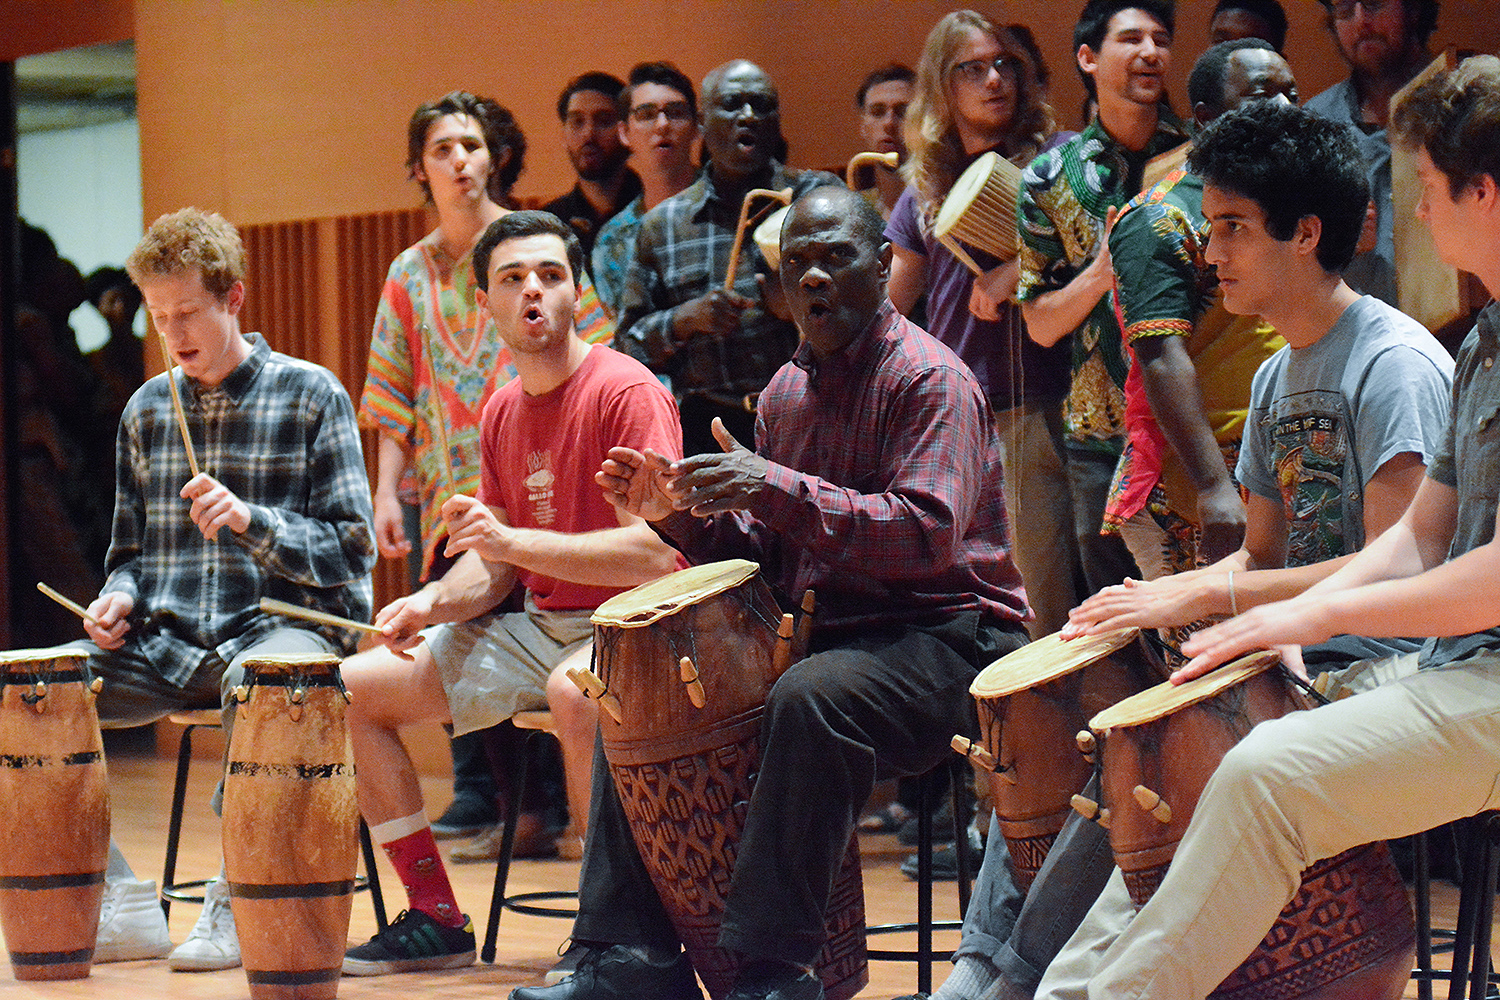 Participants in the West African Drumming and Dance workshop performed in Crowell Concert Hall on Nov. 7, with retiring Adjunct Professor of Music Abraham Adzenyah and alumni accompanying on drums. Current Wesleyan students also performed. (Photo by John Van Vlack)